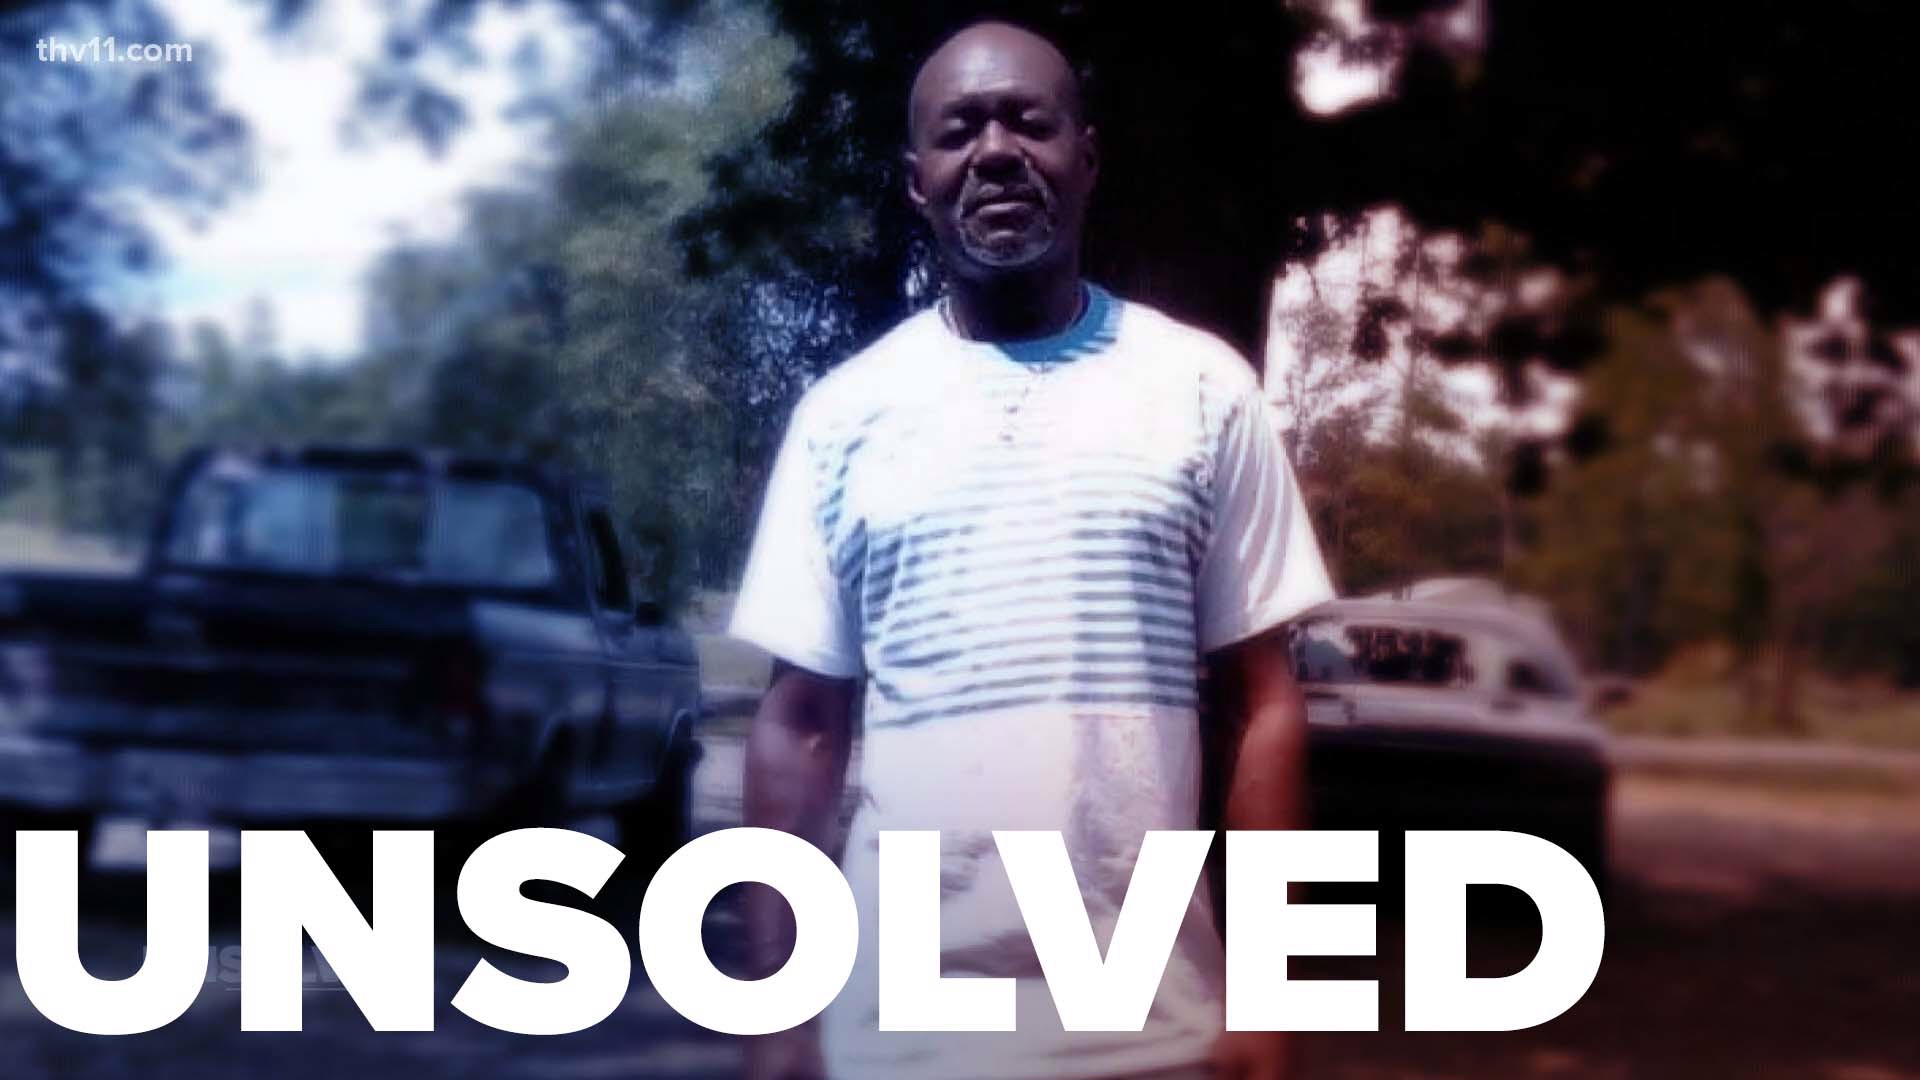 In this episode of Unsolved, Craig O'Neill takes us through mystery cases in Central Arkansas that remain without an answer.